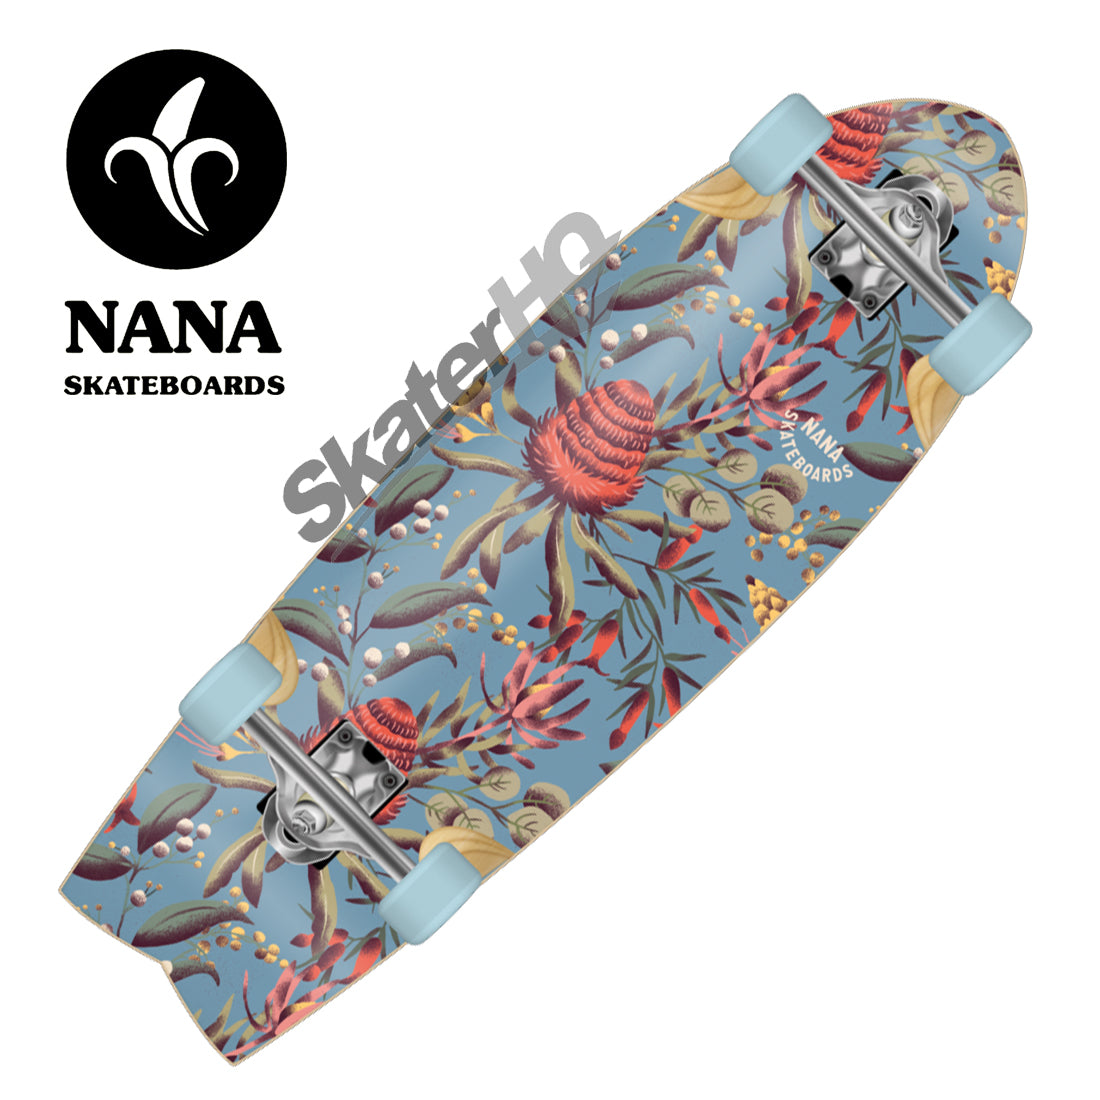 Nana Mushburger Wildflowers 32 Surfskate Complete Skateboard Compl Carving and Specialty